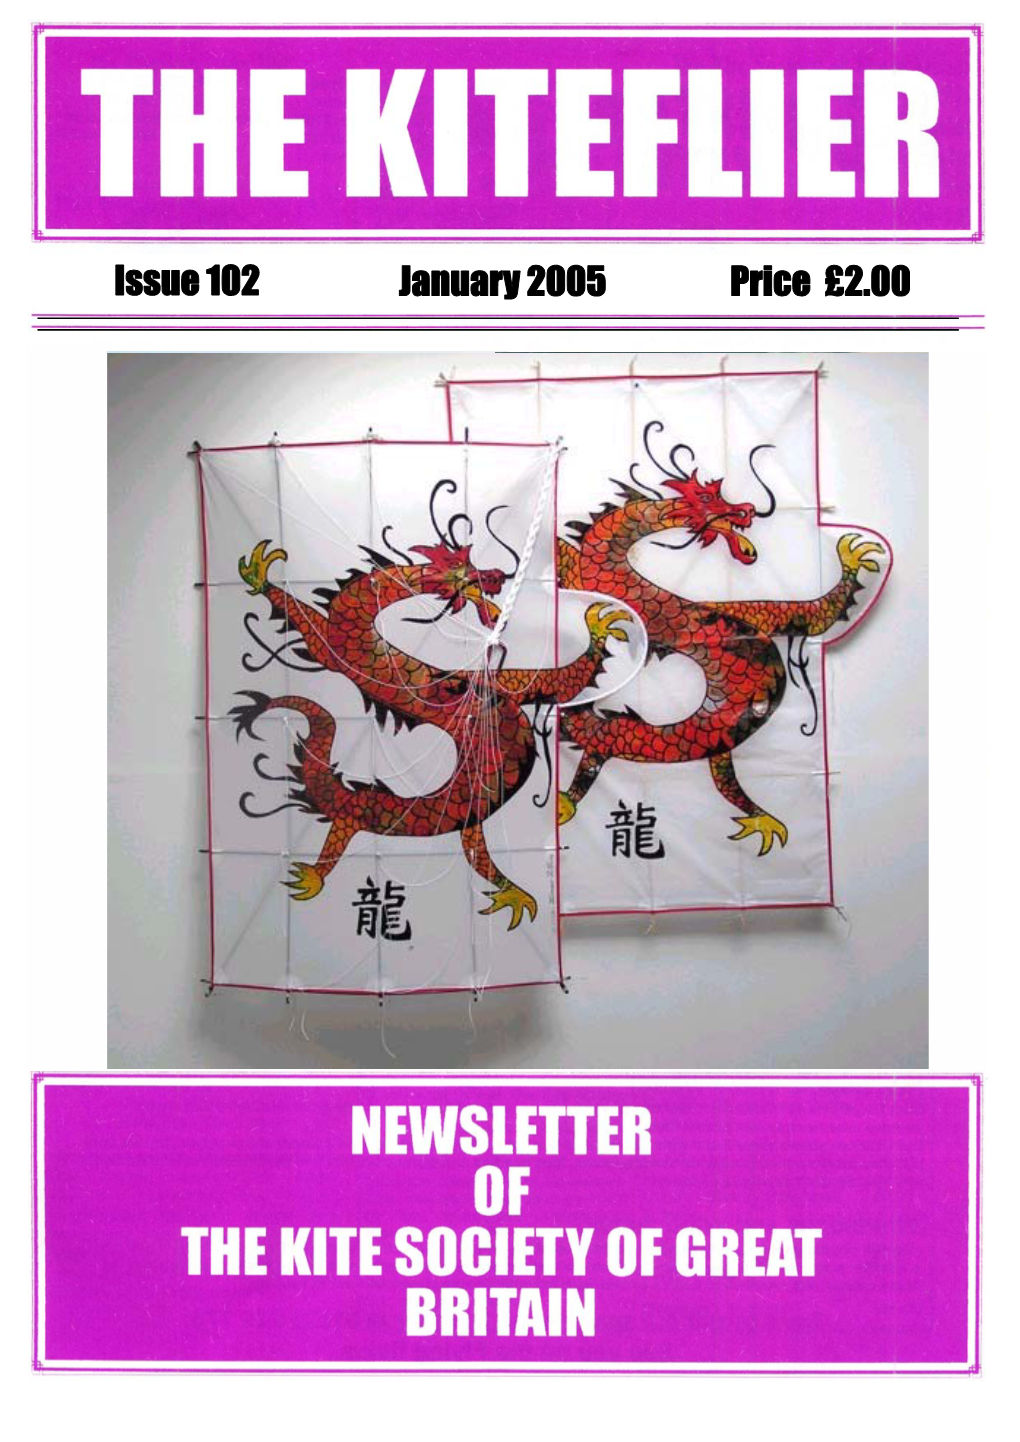 January 2005 Issue 102 Price £2.00